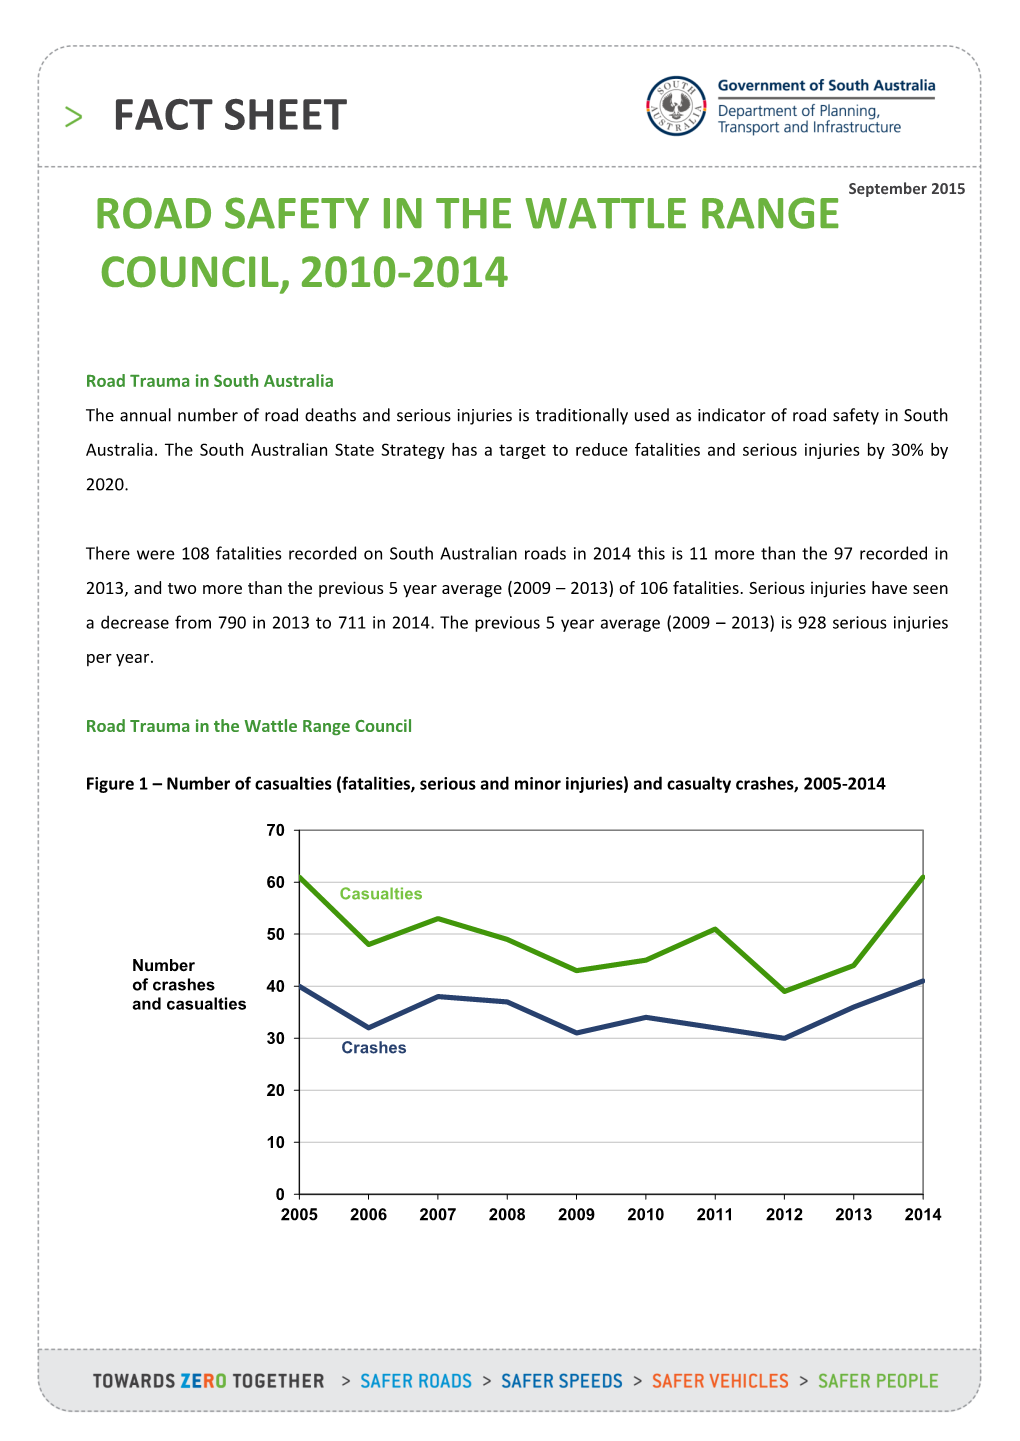 Road Safety in the Wattle Range Council,2010-2014